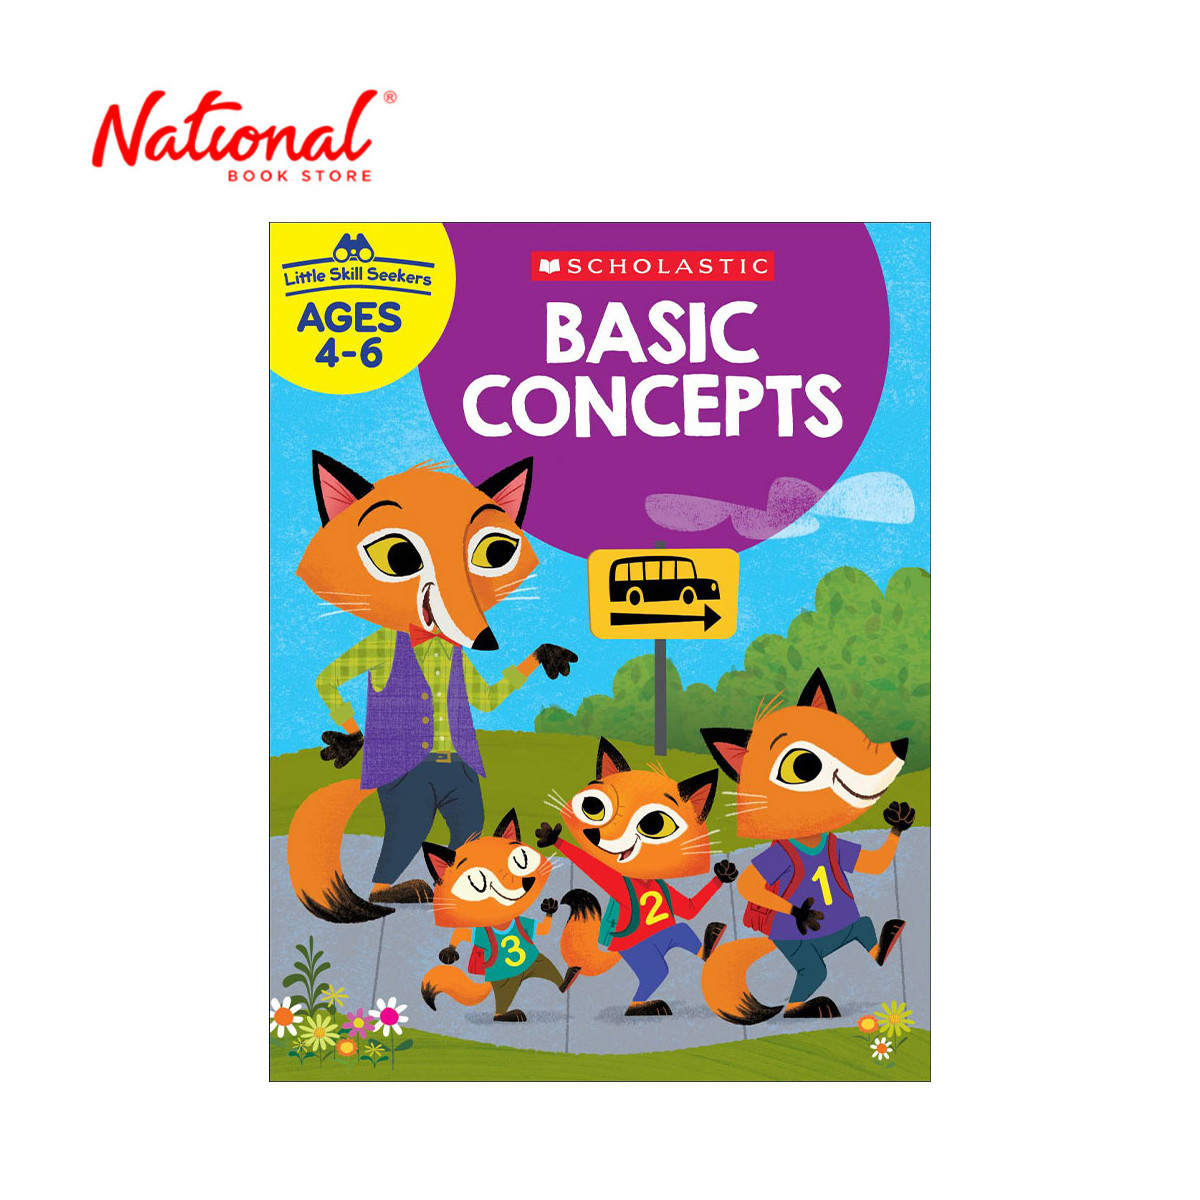 Little Skill Seekers: Basic Concepts Workbook by Scholastic Inc - Trade Paperback - Children's